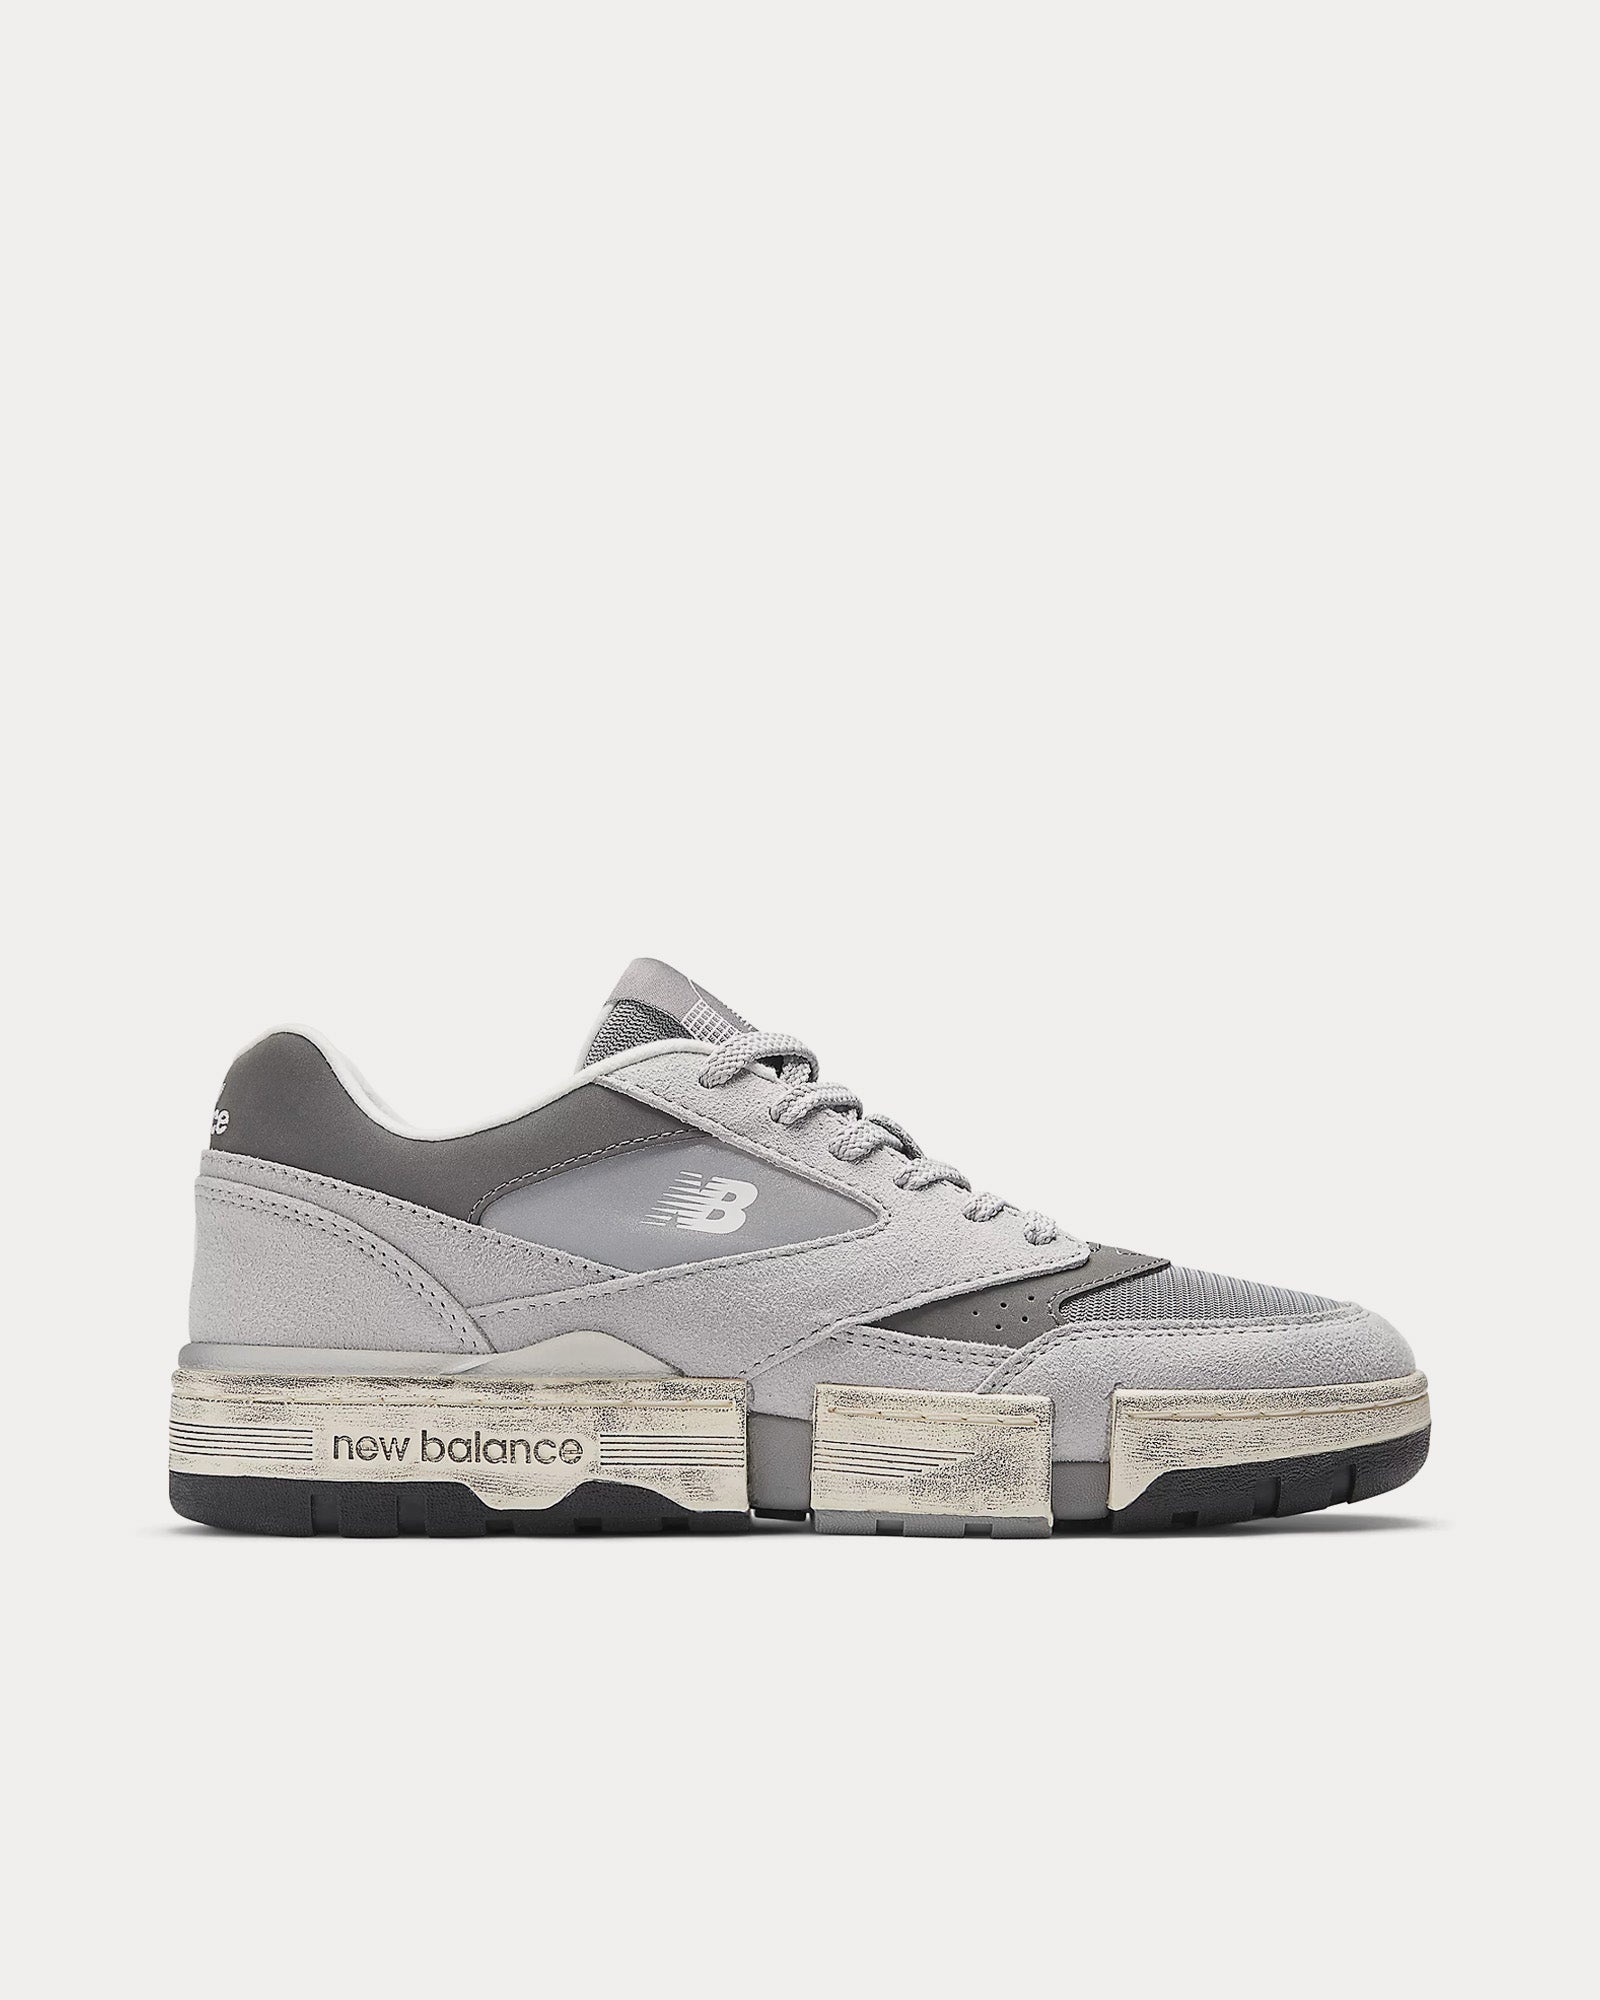 New Balance x MSFTrep - 0.01 Grey / White Low Top Sneakers